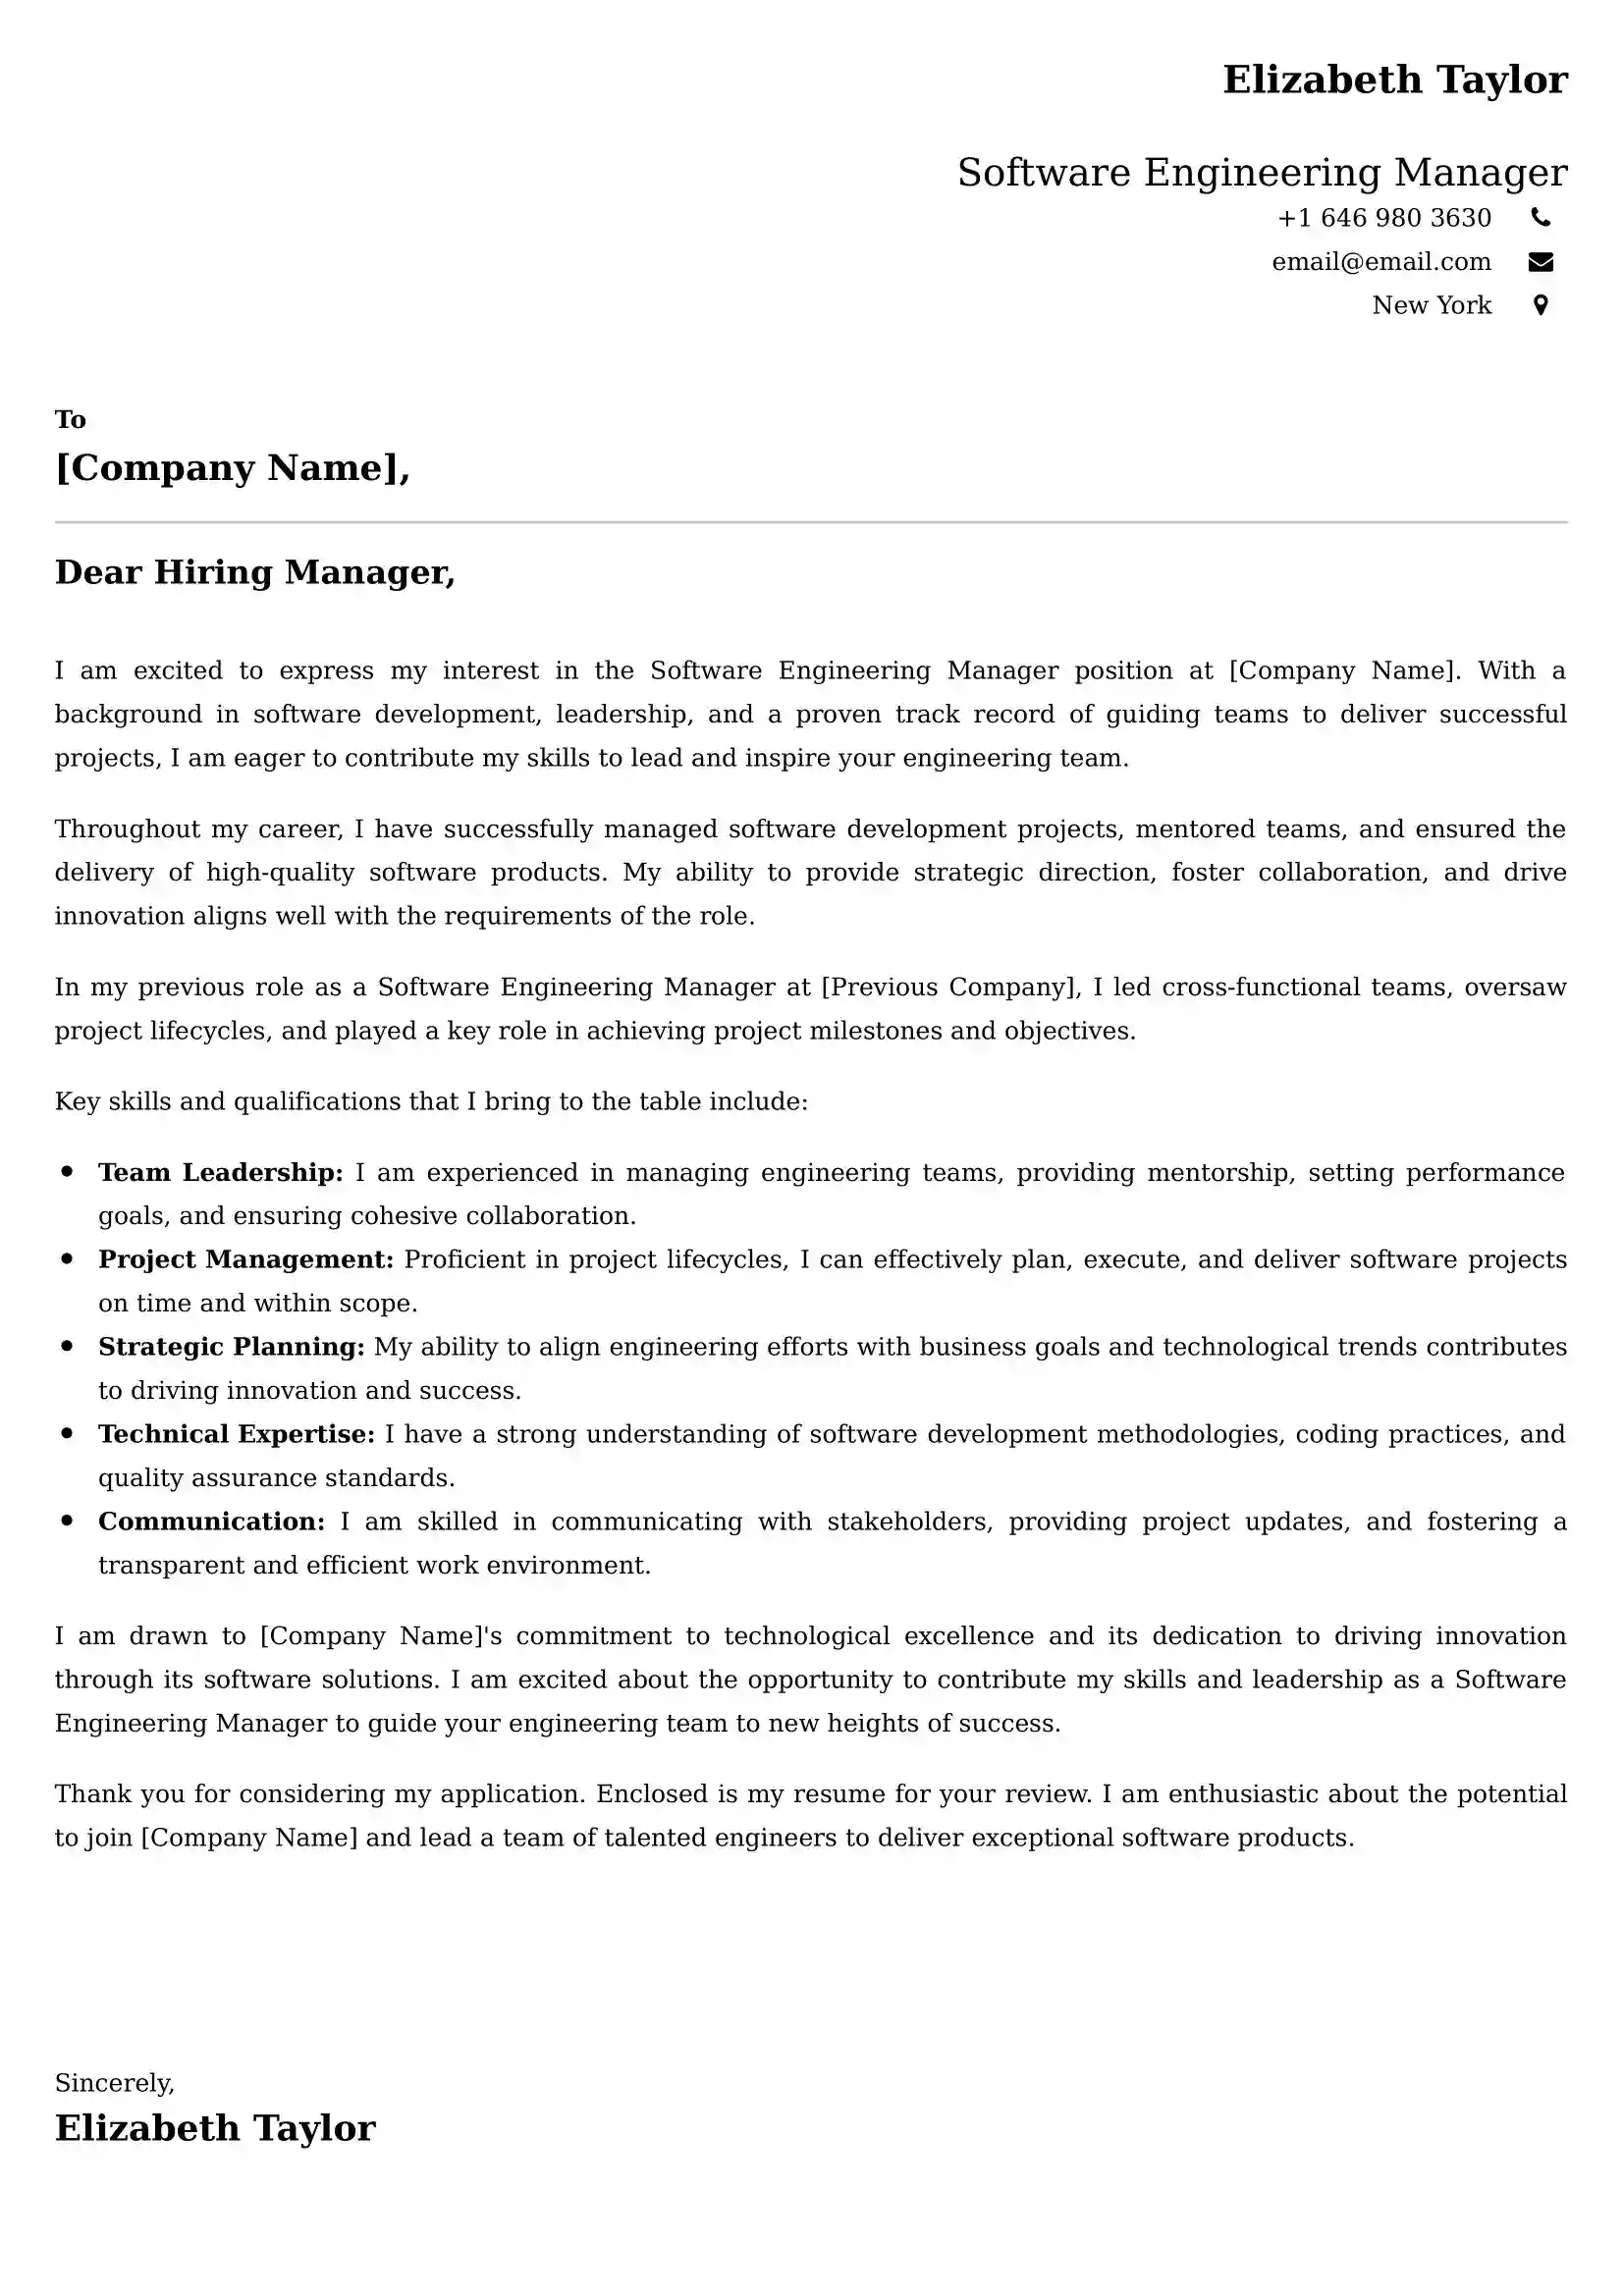 Software Engineering Manager Cover Letter Examples - US Format and Tips